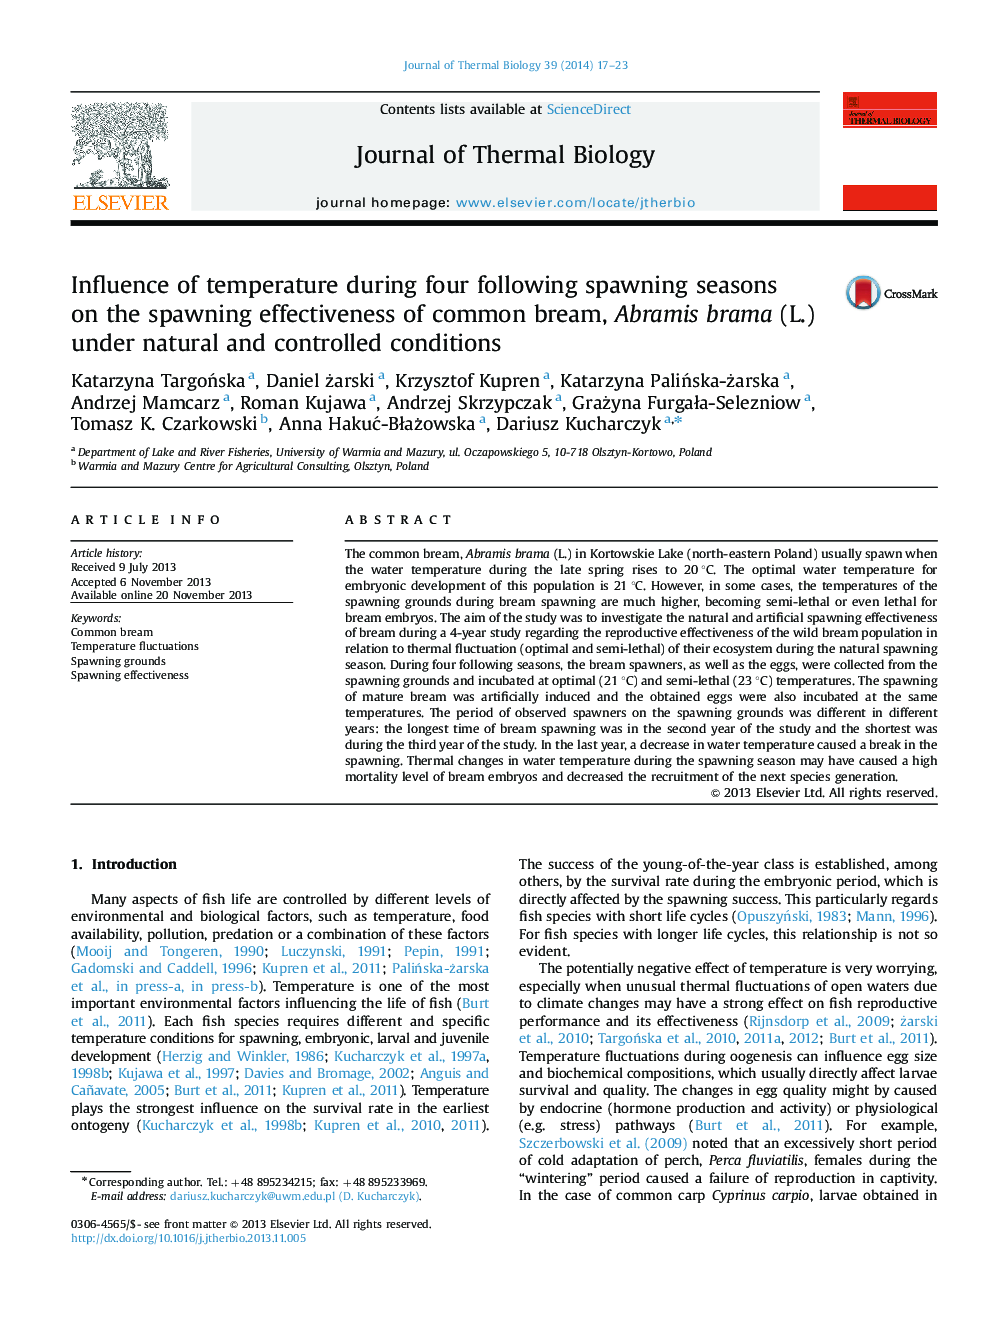 Influence of temperature during four following spawning seasons on the spawning effectiveness of common bream, Abramis brama (L.) under natural and controlled conditions